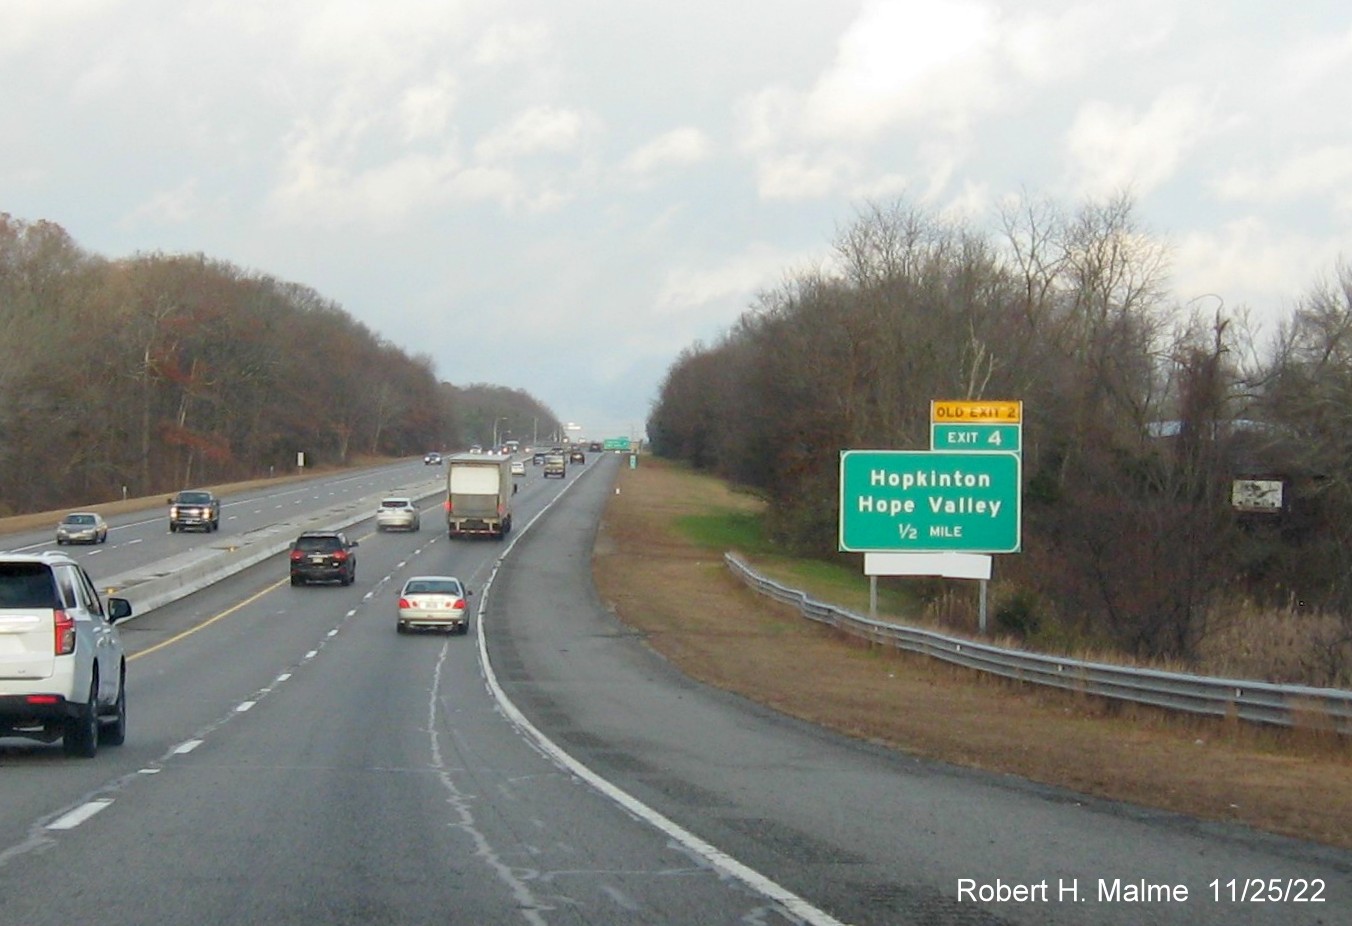 Image of ground mounted 1/2 mile advance sign for the Hopkinton exit with new milepost based exit numbers and yellow Old Exit 2 sign above exit tab on I-95 South, November 2022